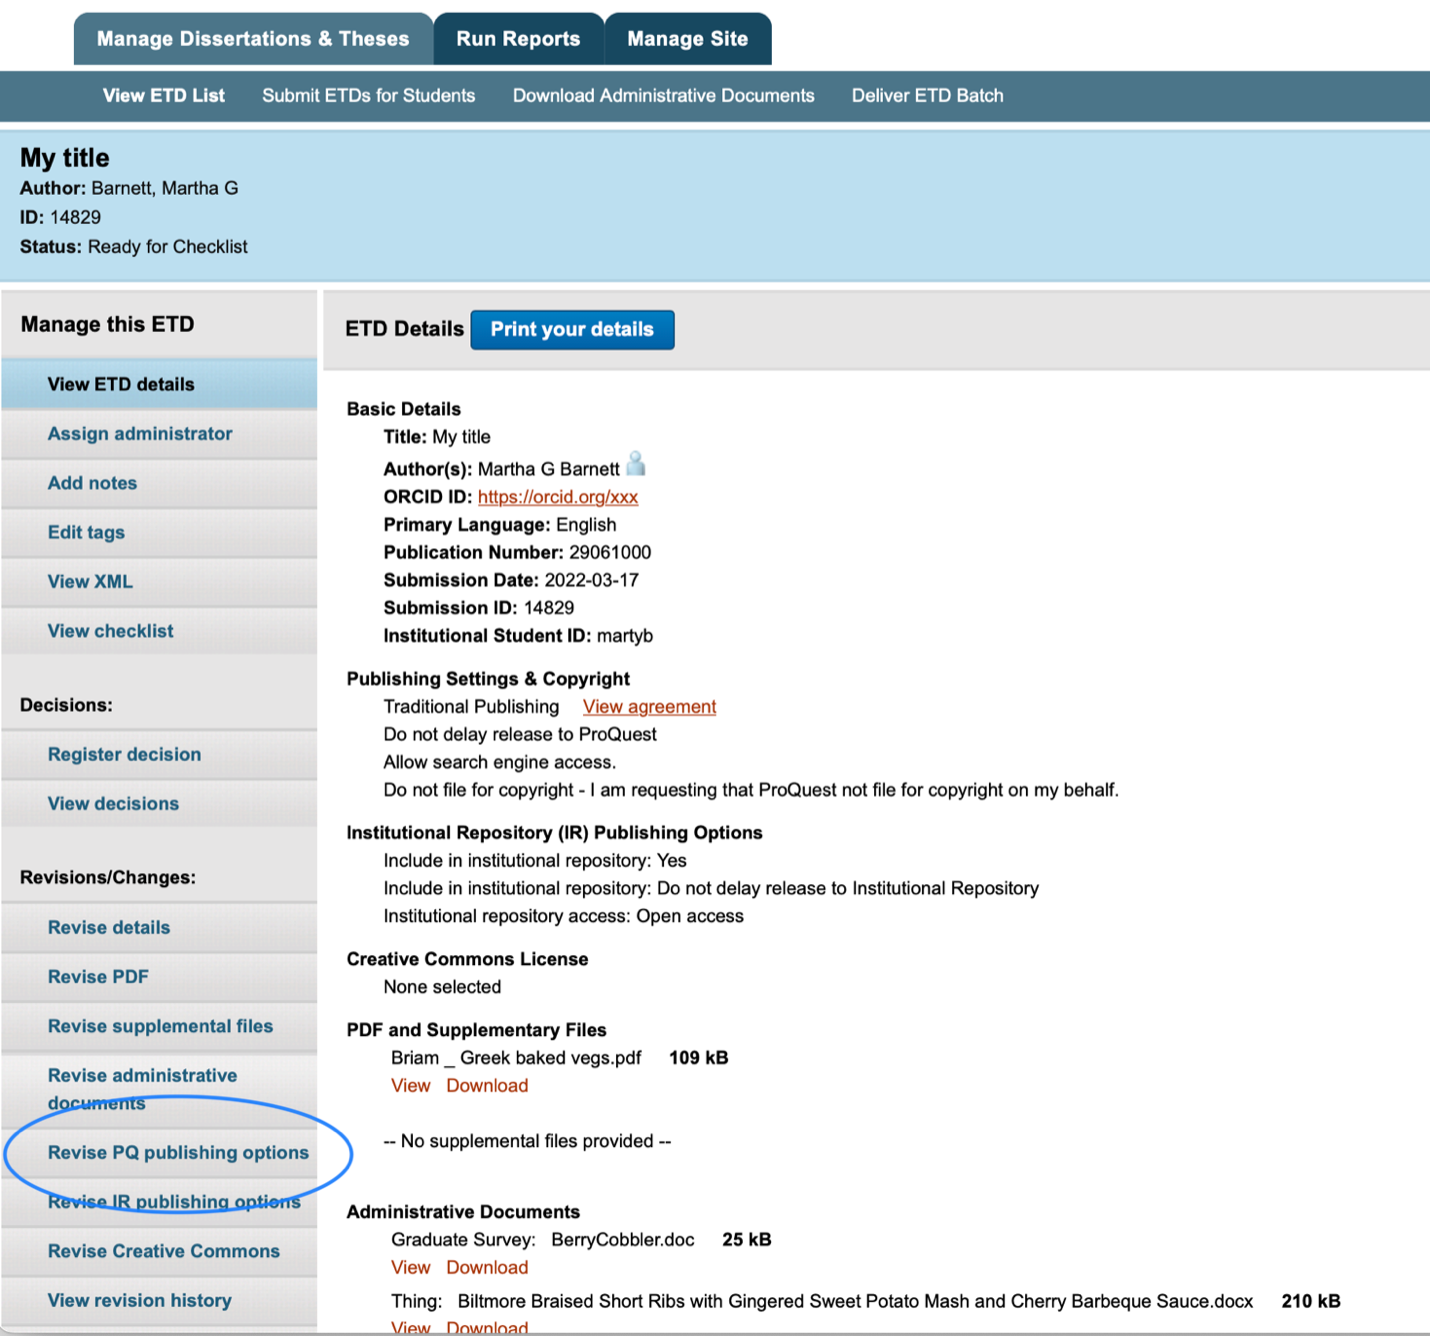 example screen in ProQuest showing menu item for revising publishing options